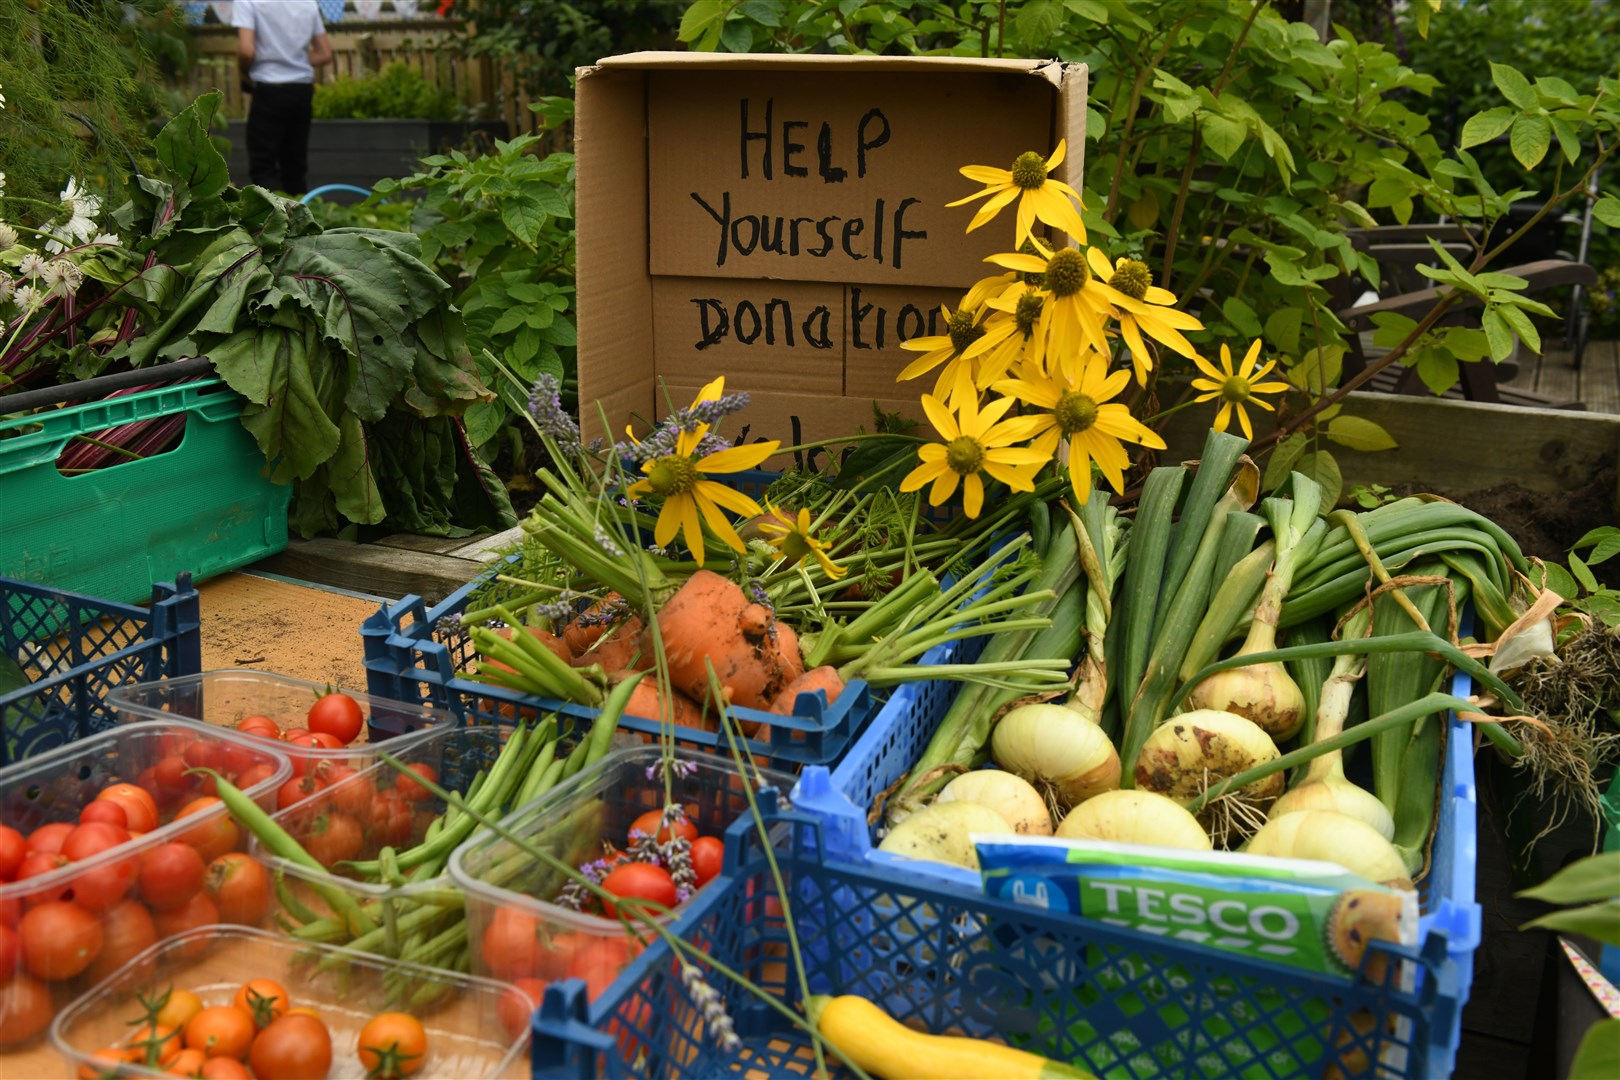 Produce grown in the Beauly Community Garden. Pictures: James Mackenzie.